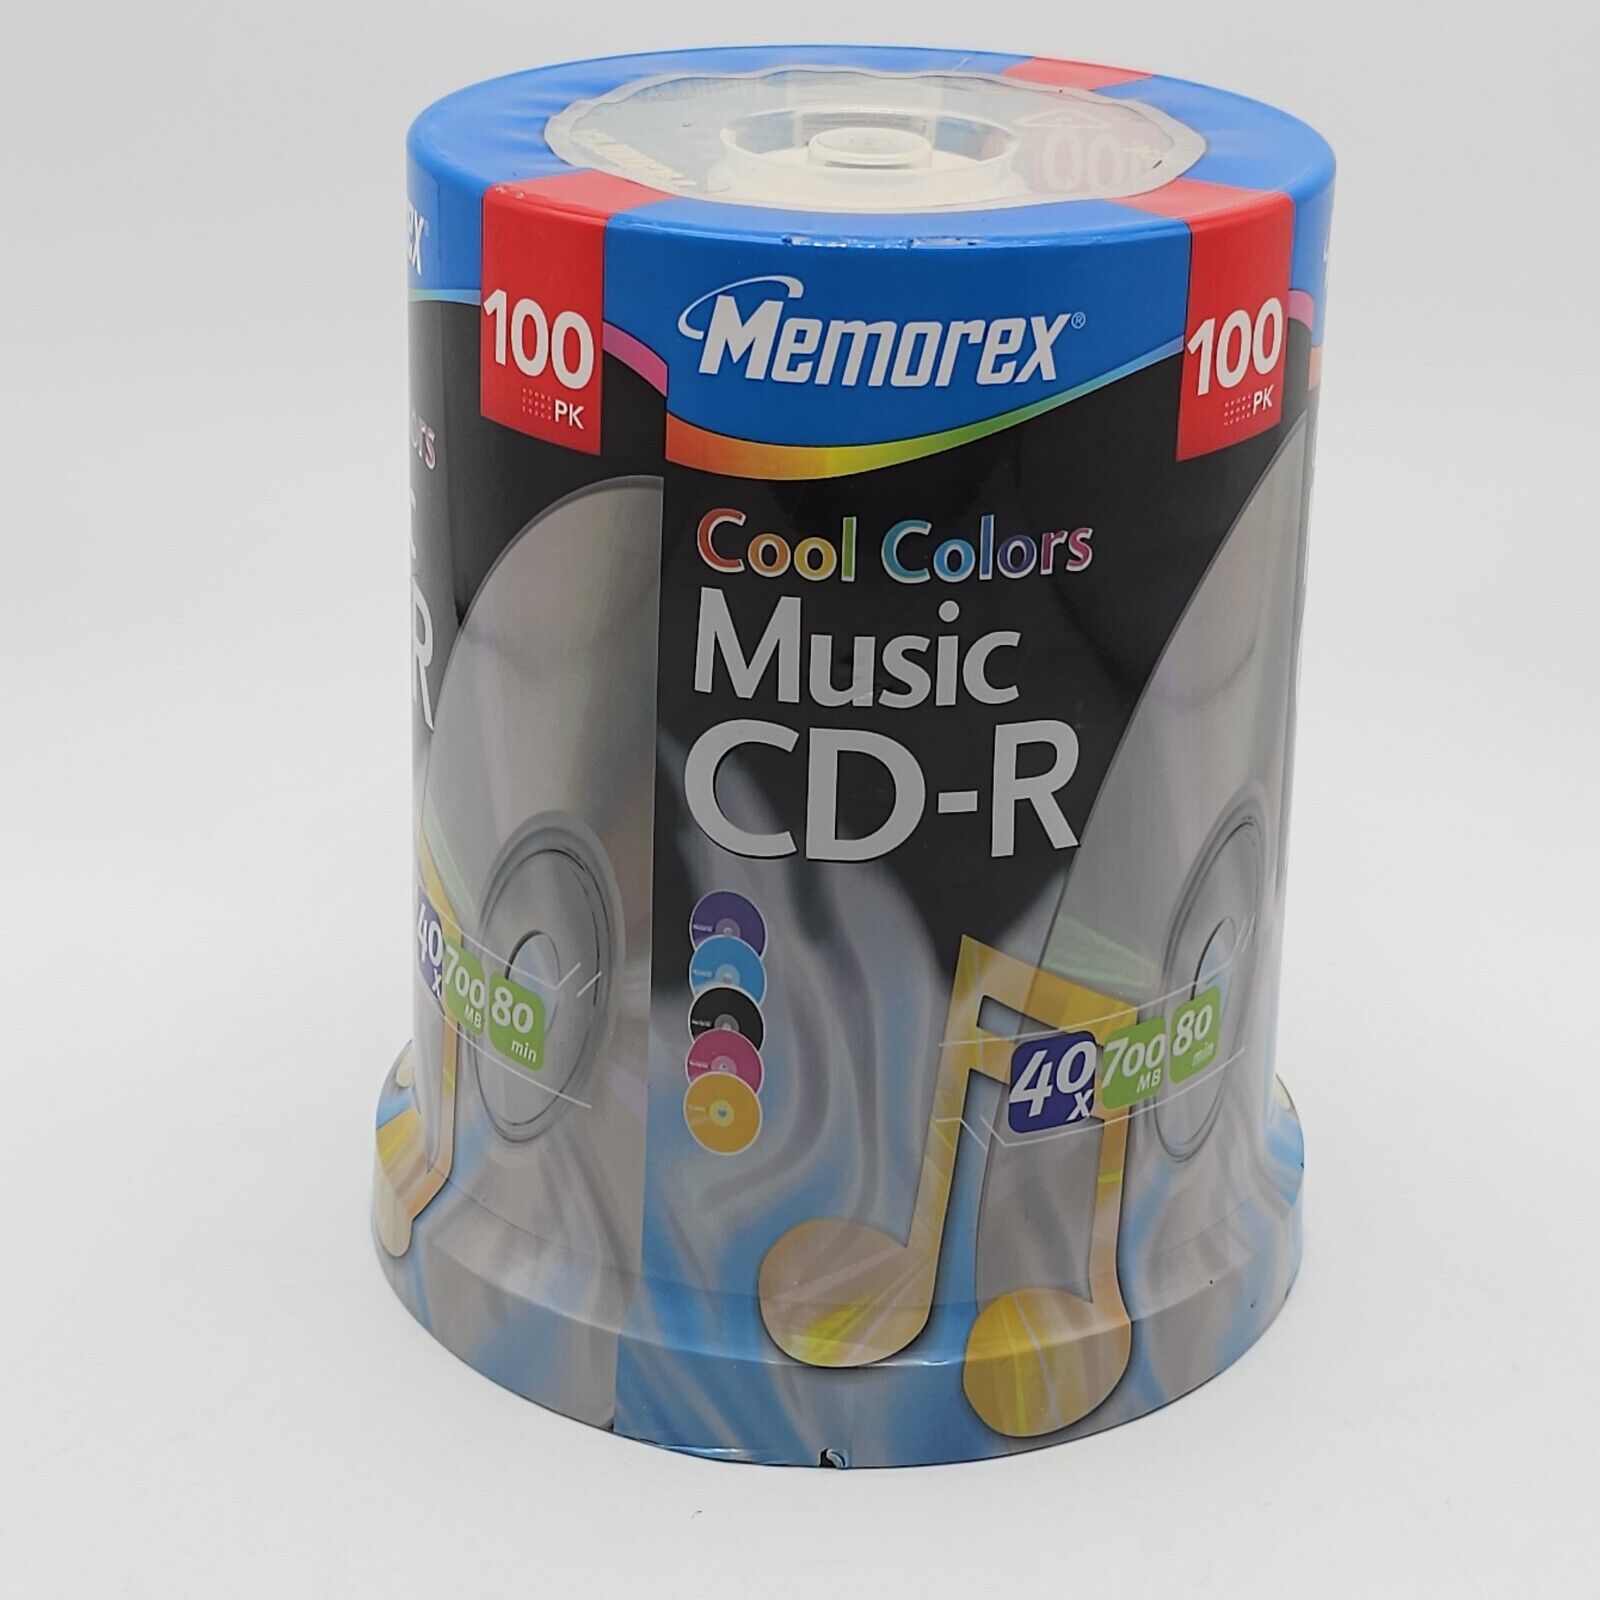 Memorex Cool Colors CD-R 100 Pack 48x 700MB 80-Min Recordable Blank Discs SEALED